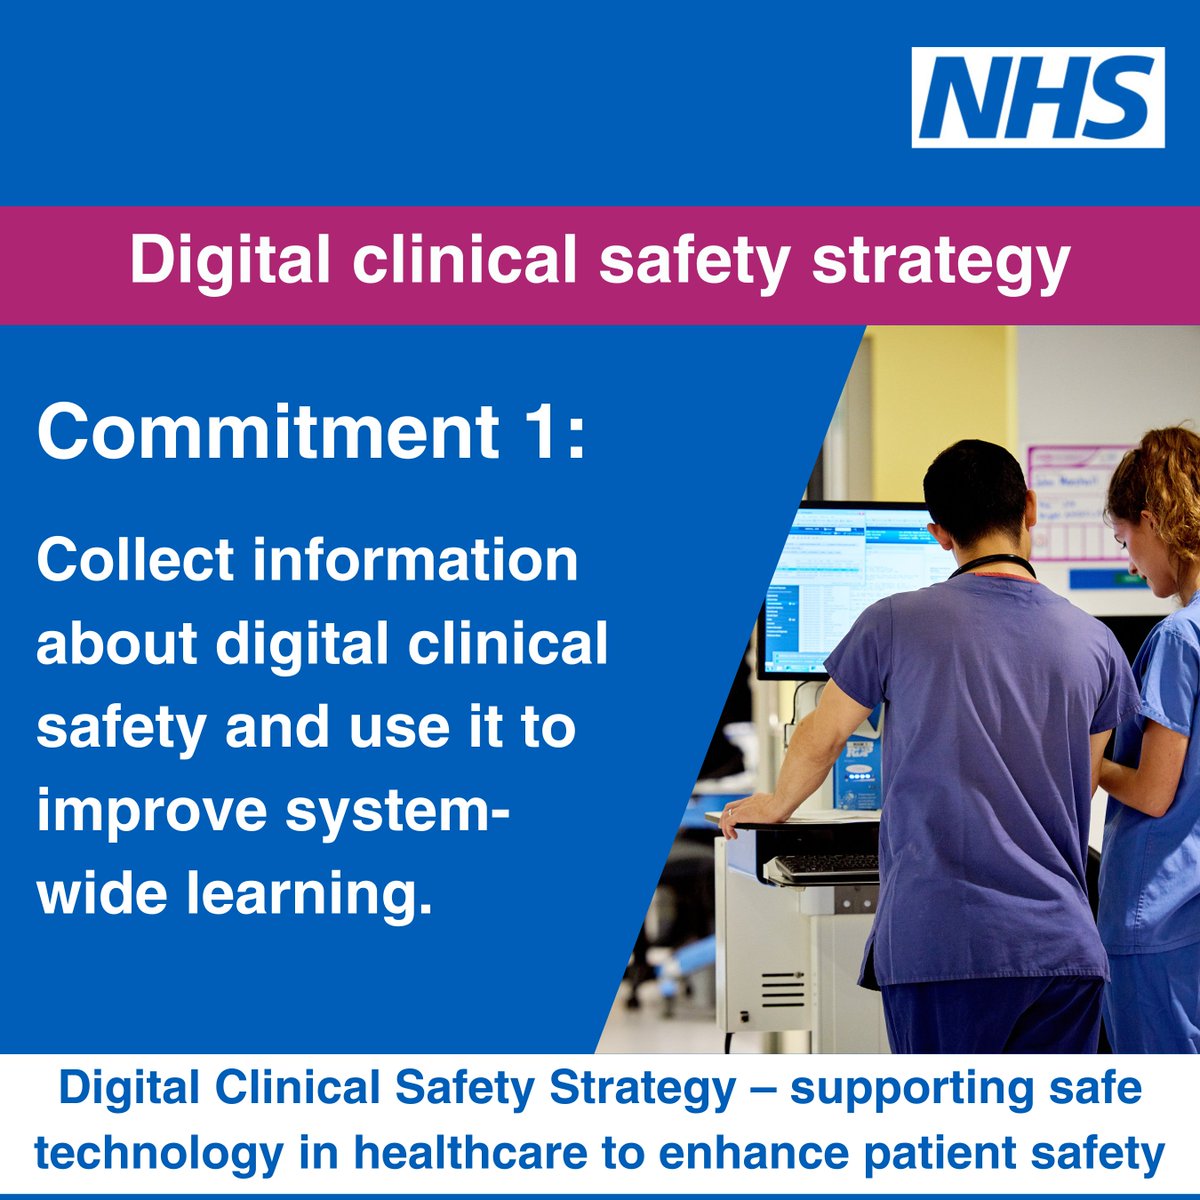 Our #DigitalClinicalSafetyStrategy has 5 core commitments. Through commitment 1 we are ensuring the NHS captures patient safety events involving digital devices and systems, so we can learn from them and take steps to improve safety. Find out more 👉 england.nhs.uk/patient-safety…